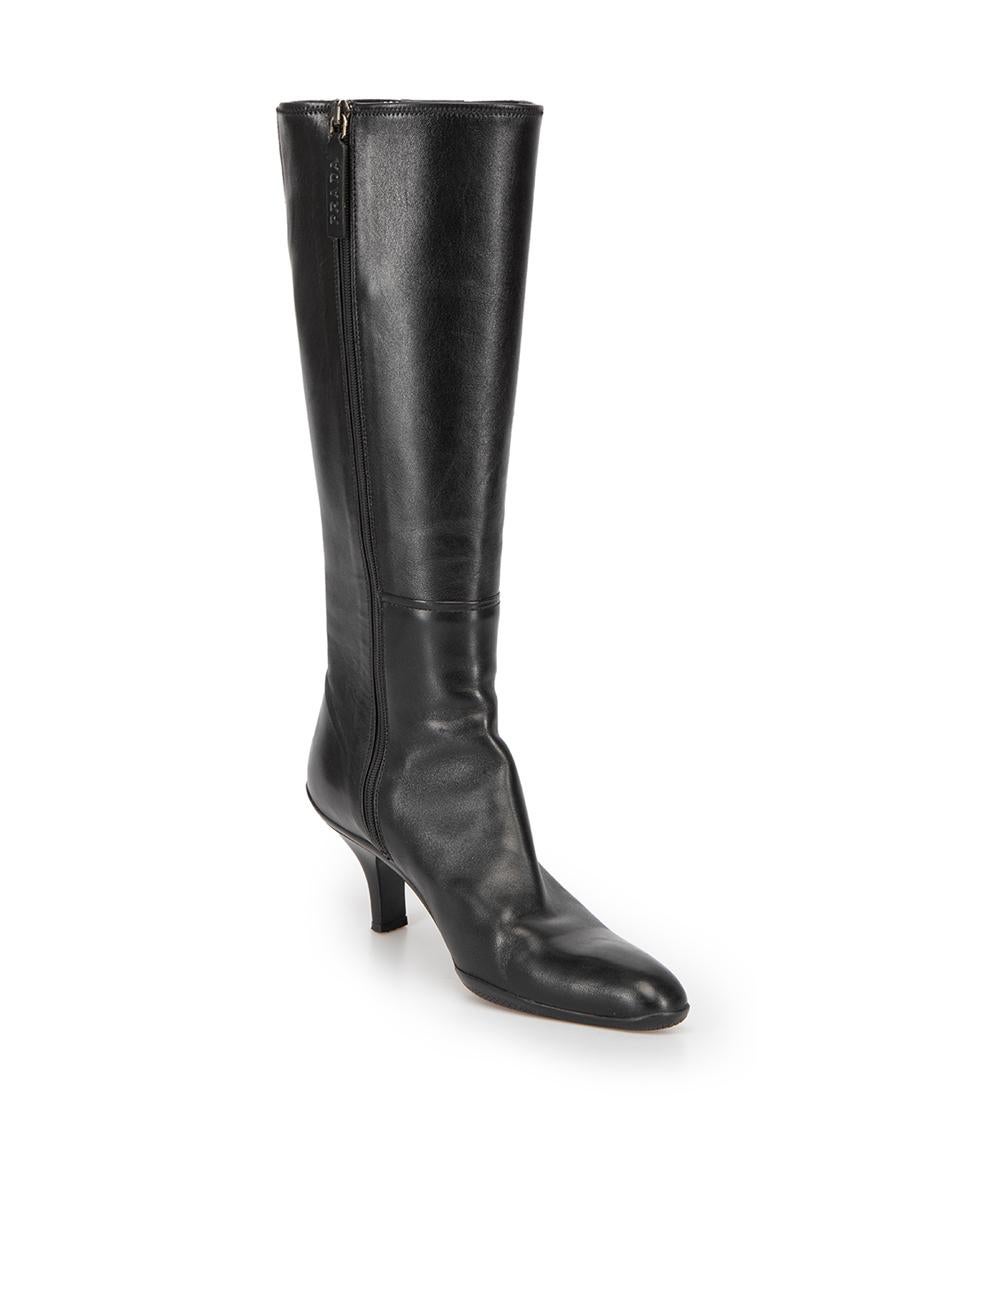 CONDITION is Very good. Minimal wear to boots is evident. Minimal wear to the heels of both with slight scratch marks on this used Prada Sport designer resale item. 



Details


Black

Leather

Knee high boots

Pointed toe

Mid heel

Side zip